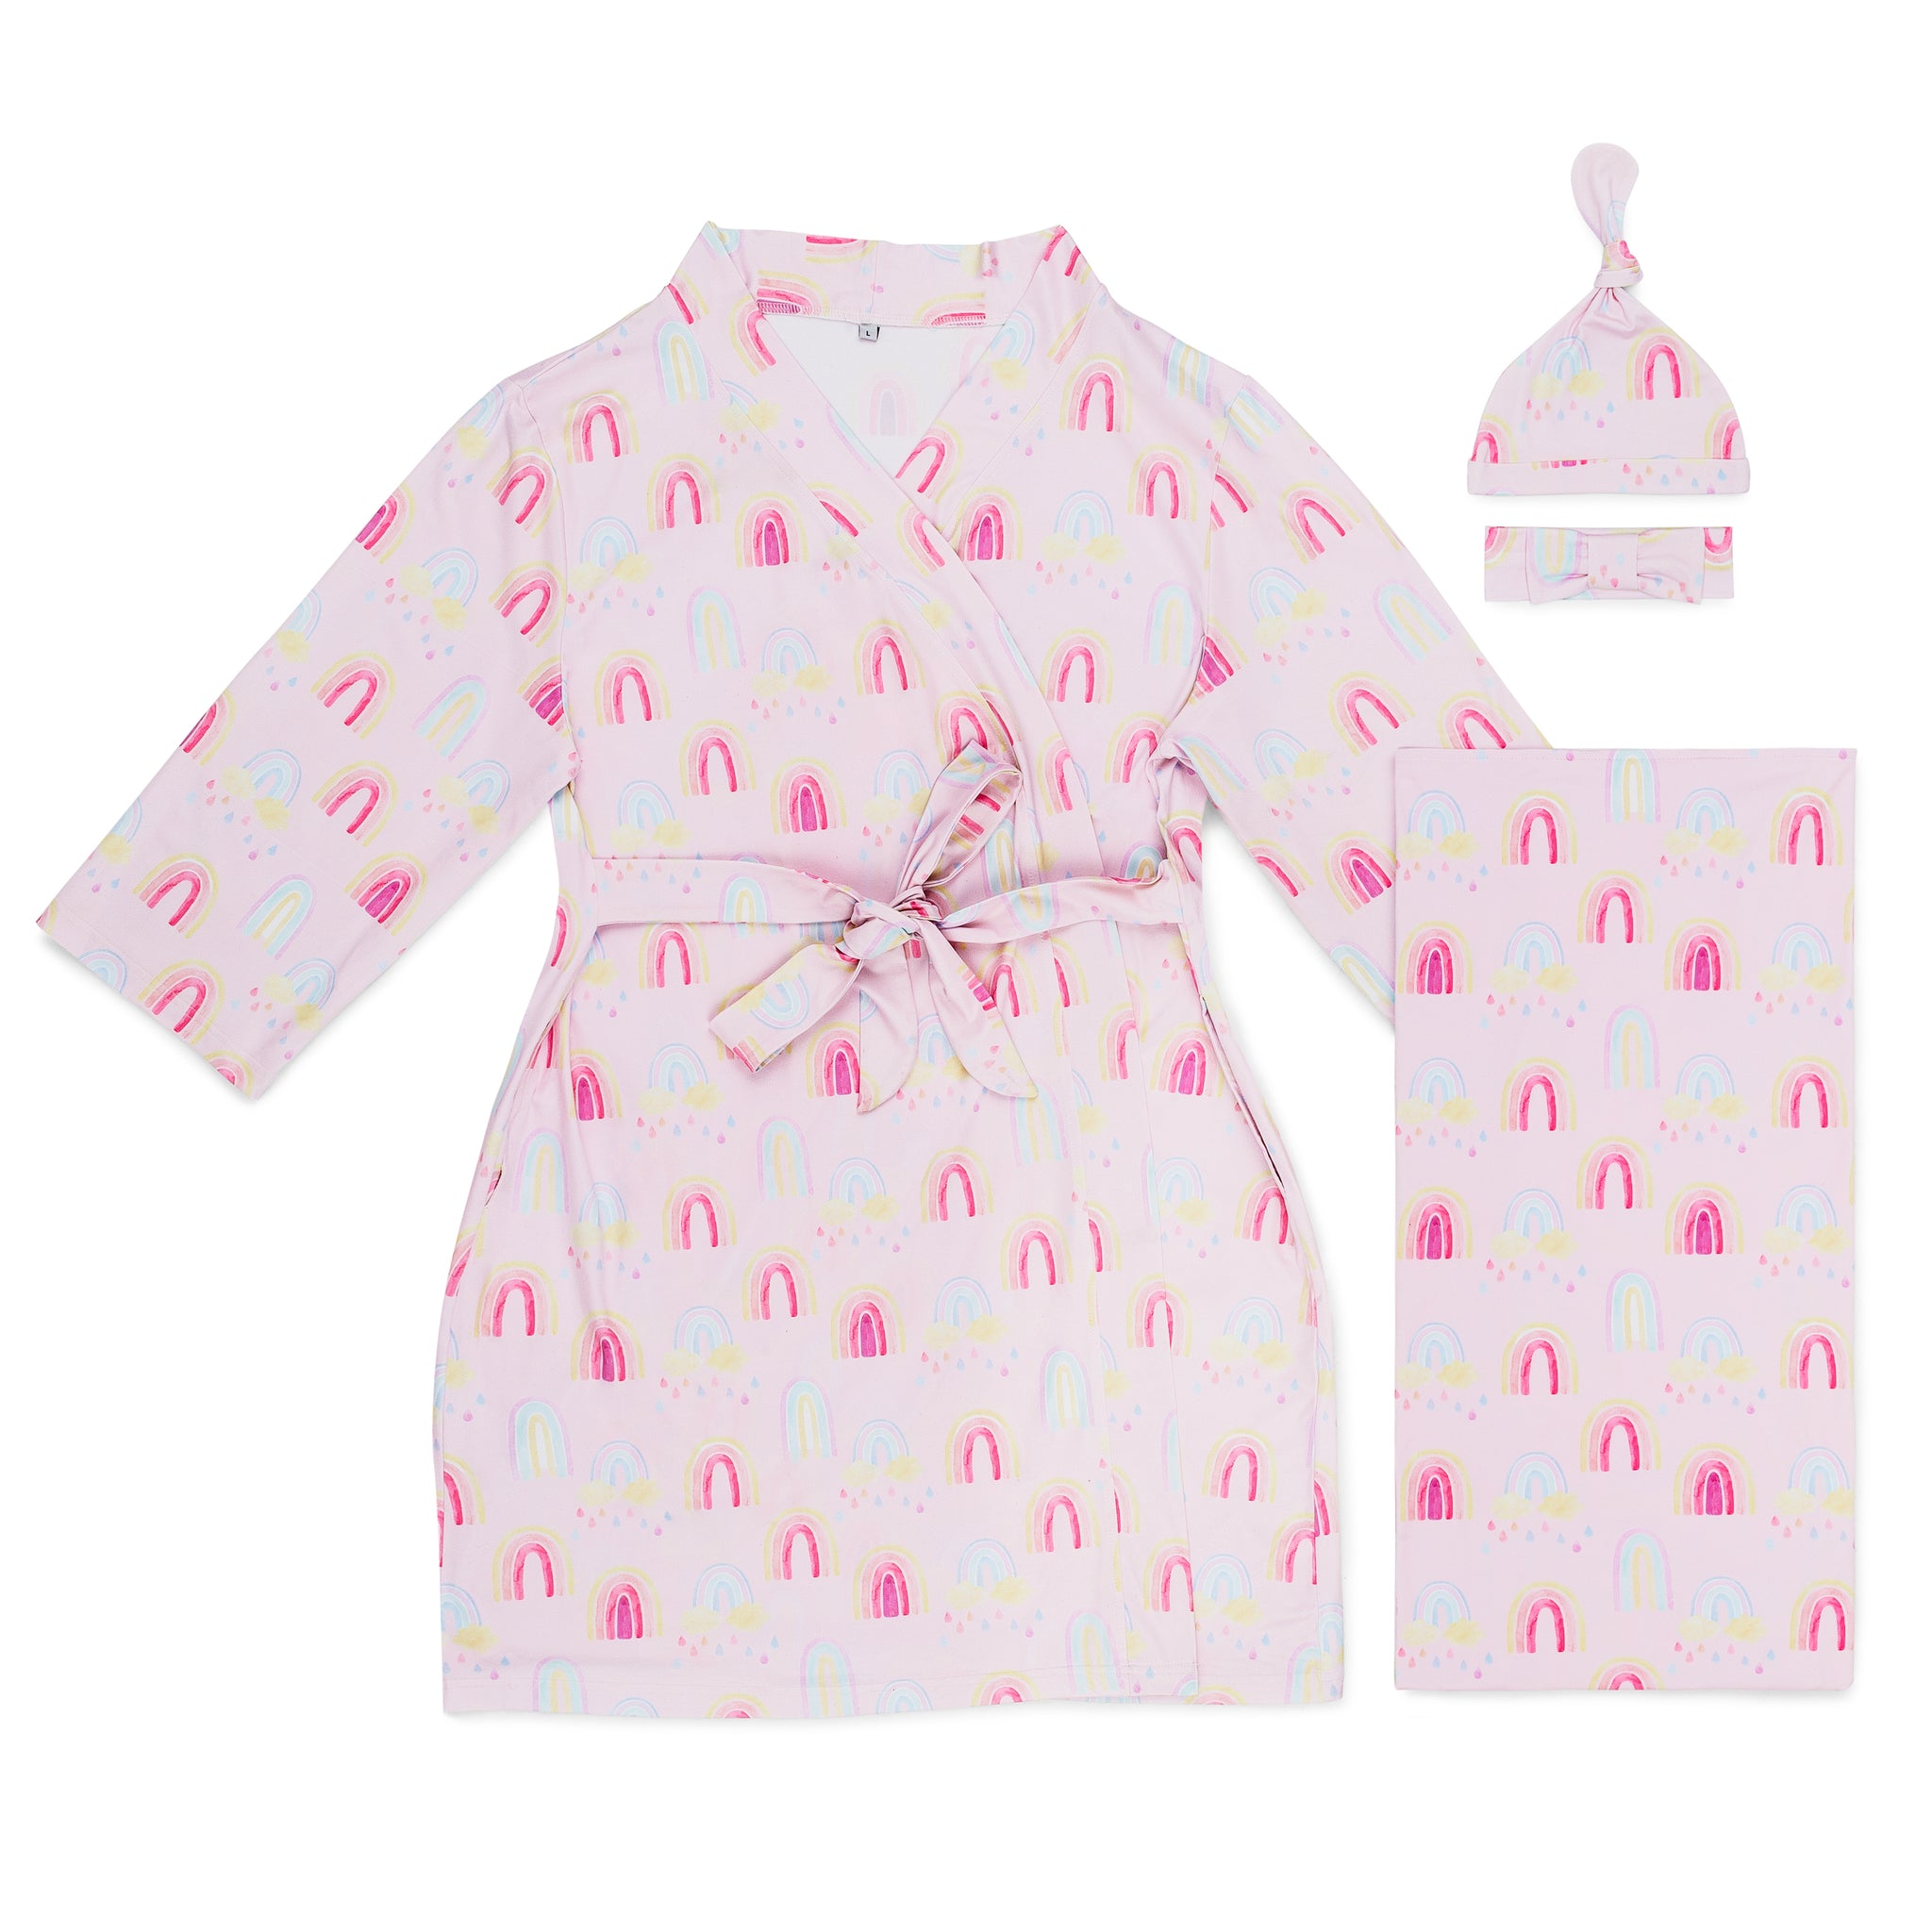 Mommy and Me Robe and Swaddle Set. Maternity Robe and Swaddle Set